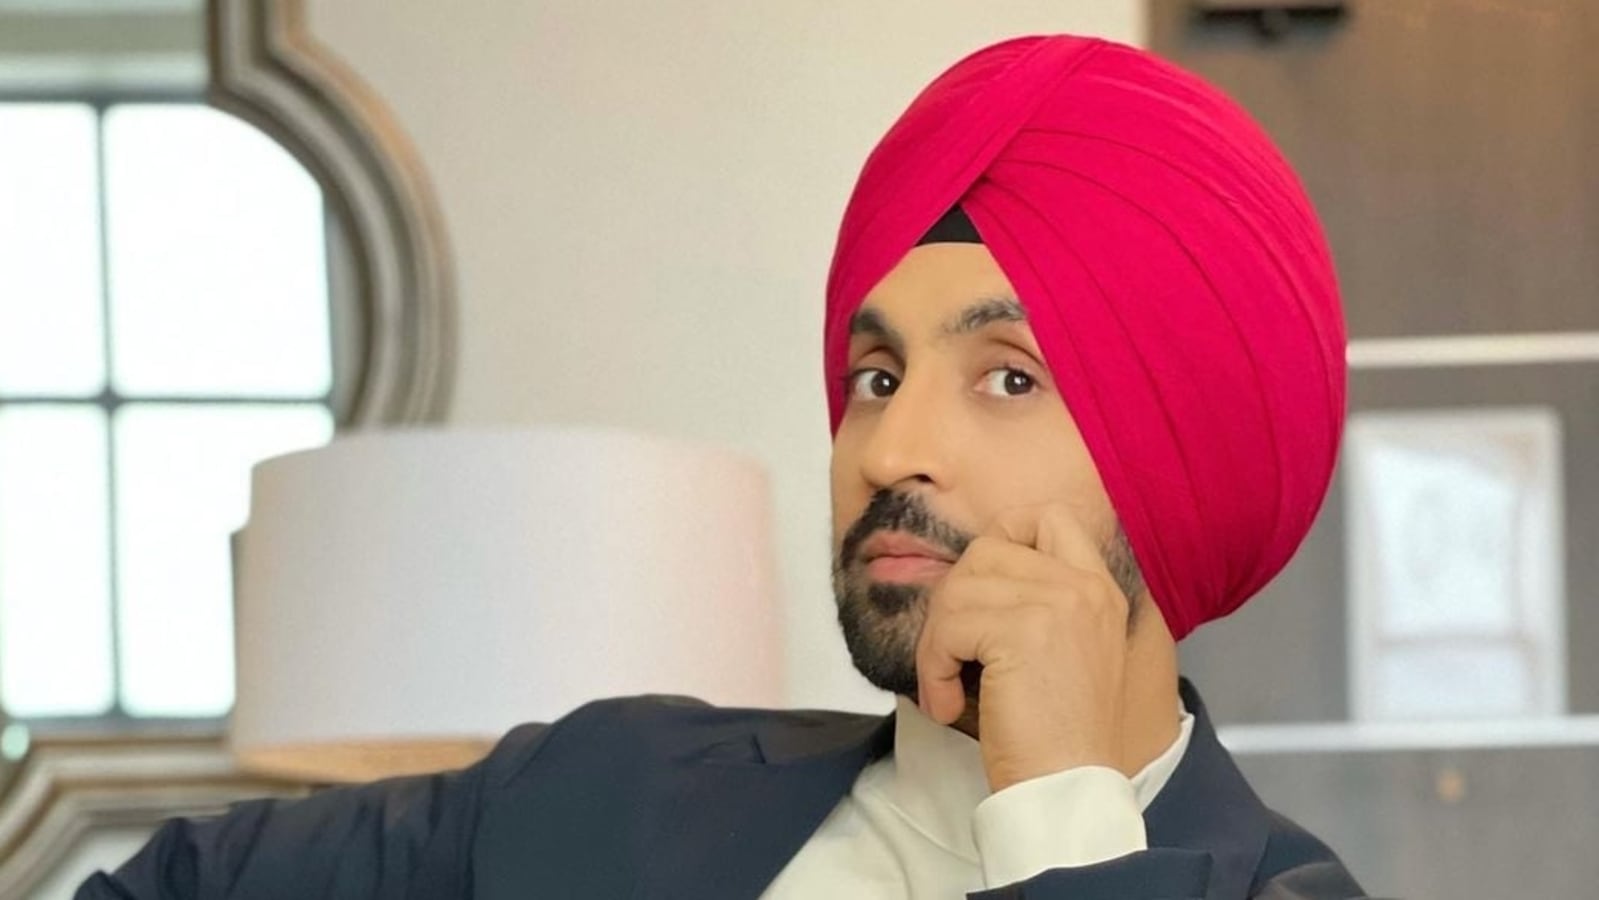 Diljit Dosanjh says he will sing in Punjabi at Coachella: ‘We also listen to songs whose language we don’t understand’